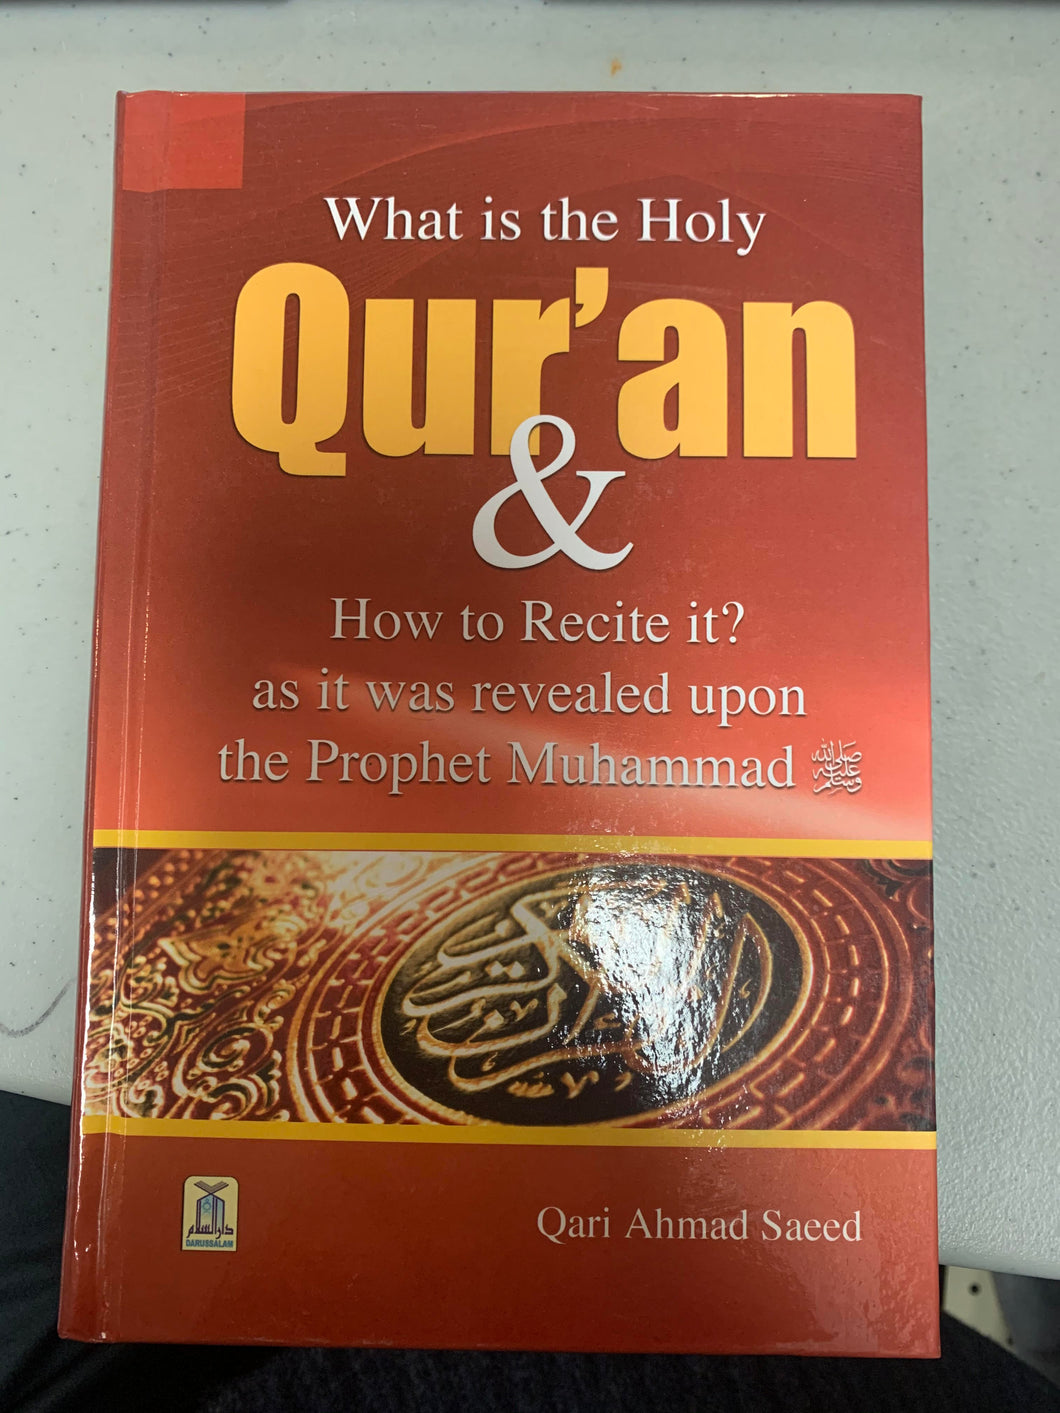 What is the Holy Quran (& How to Recite It)